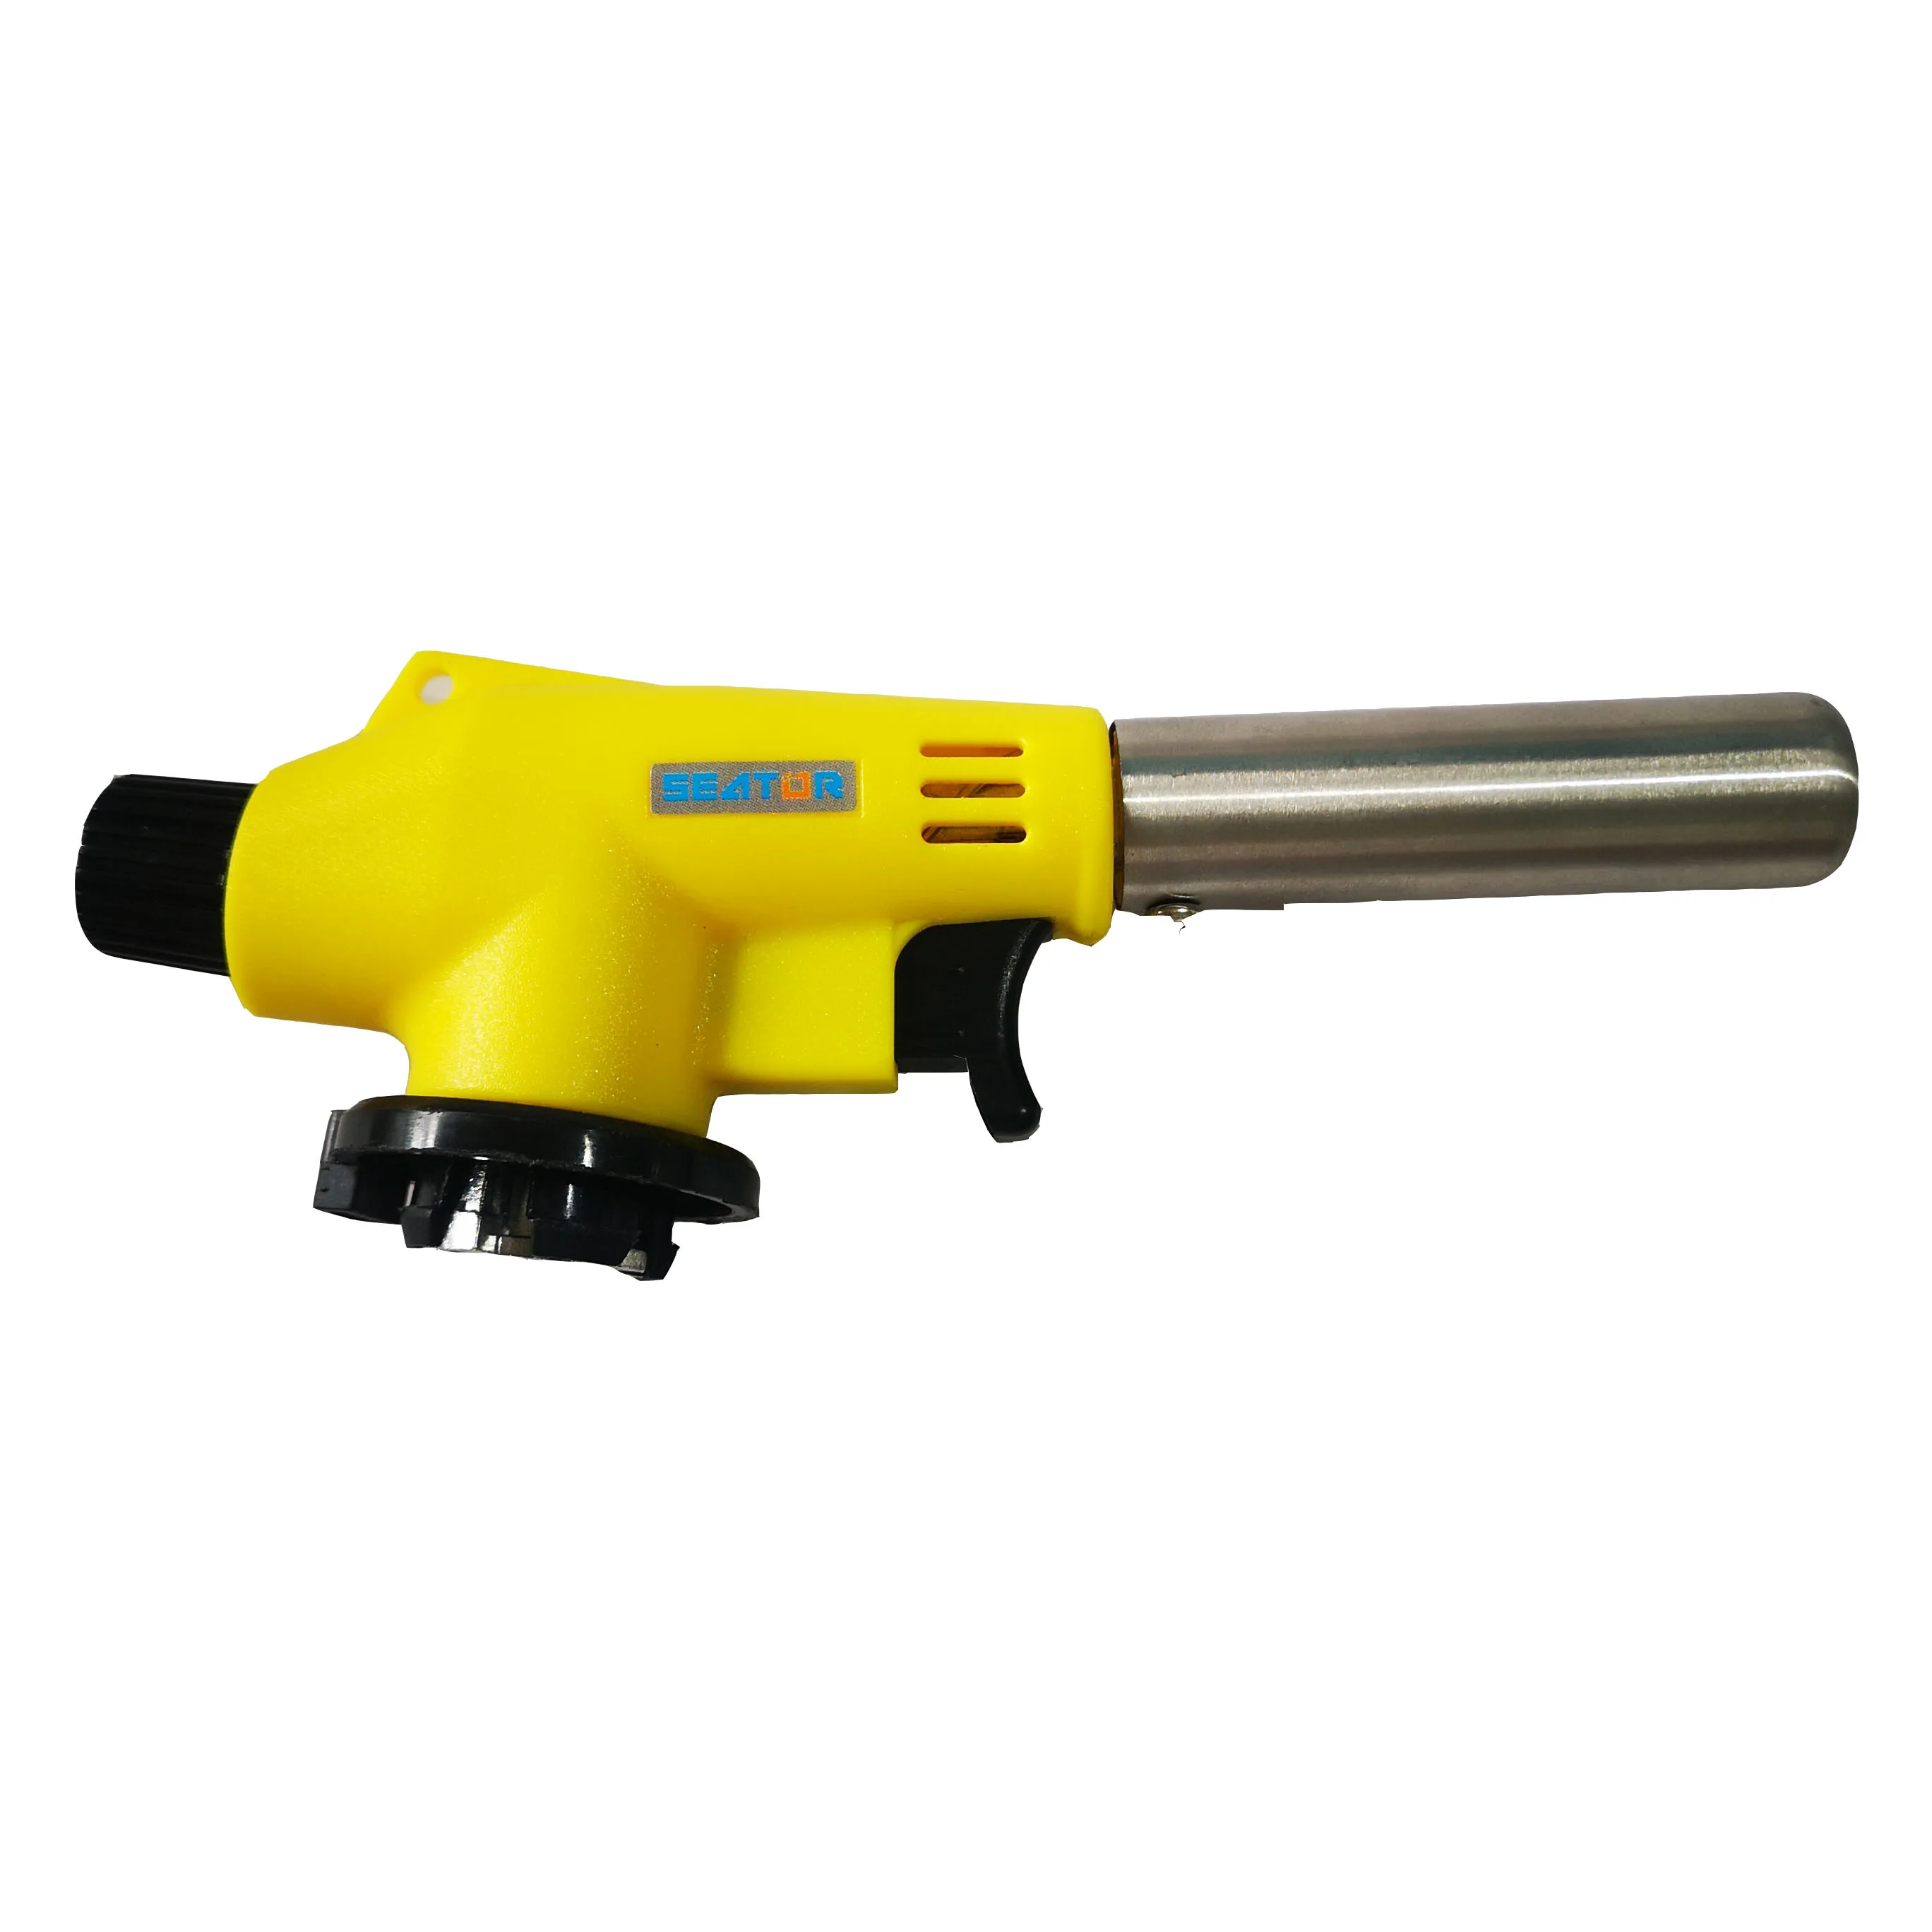 Brand New Cooking Welding Gas Homeuse Butane Blow Torch Flame Gun Manufacturer With High Quality